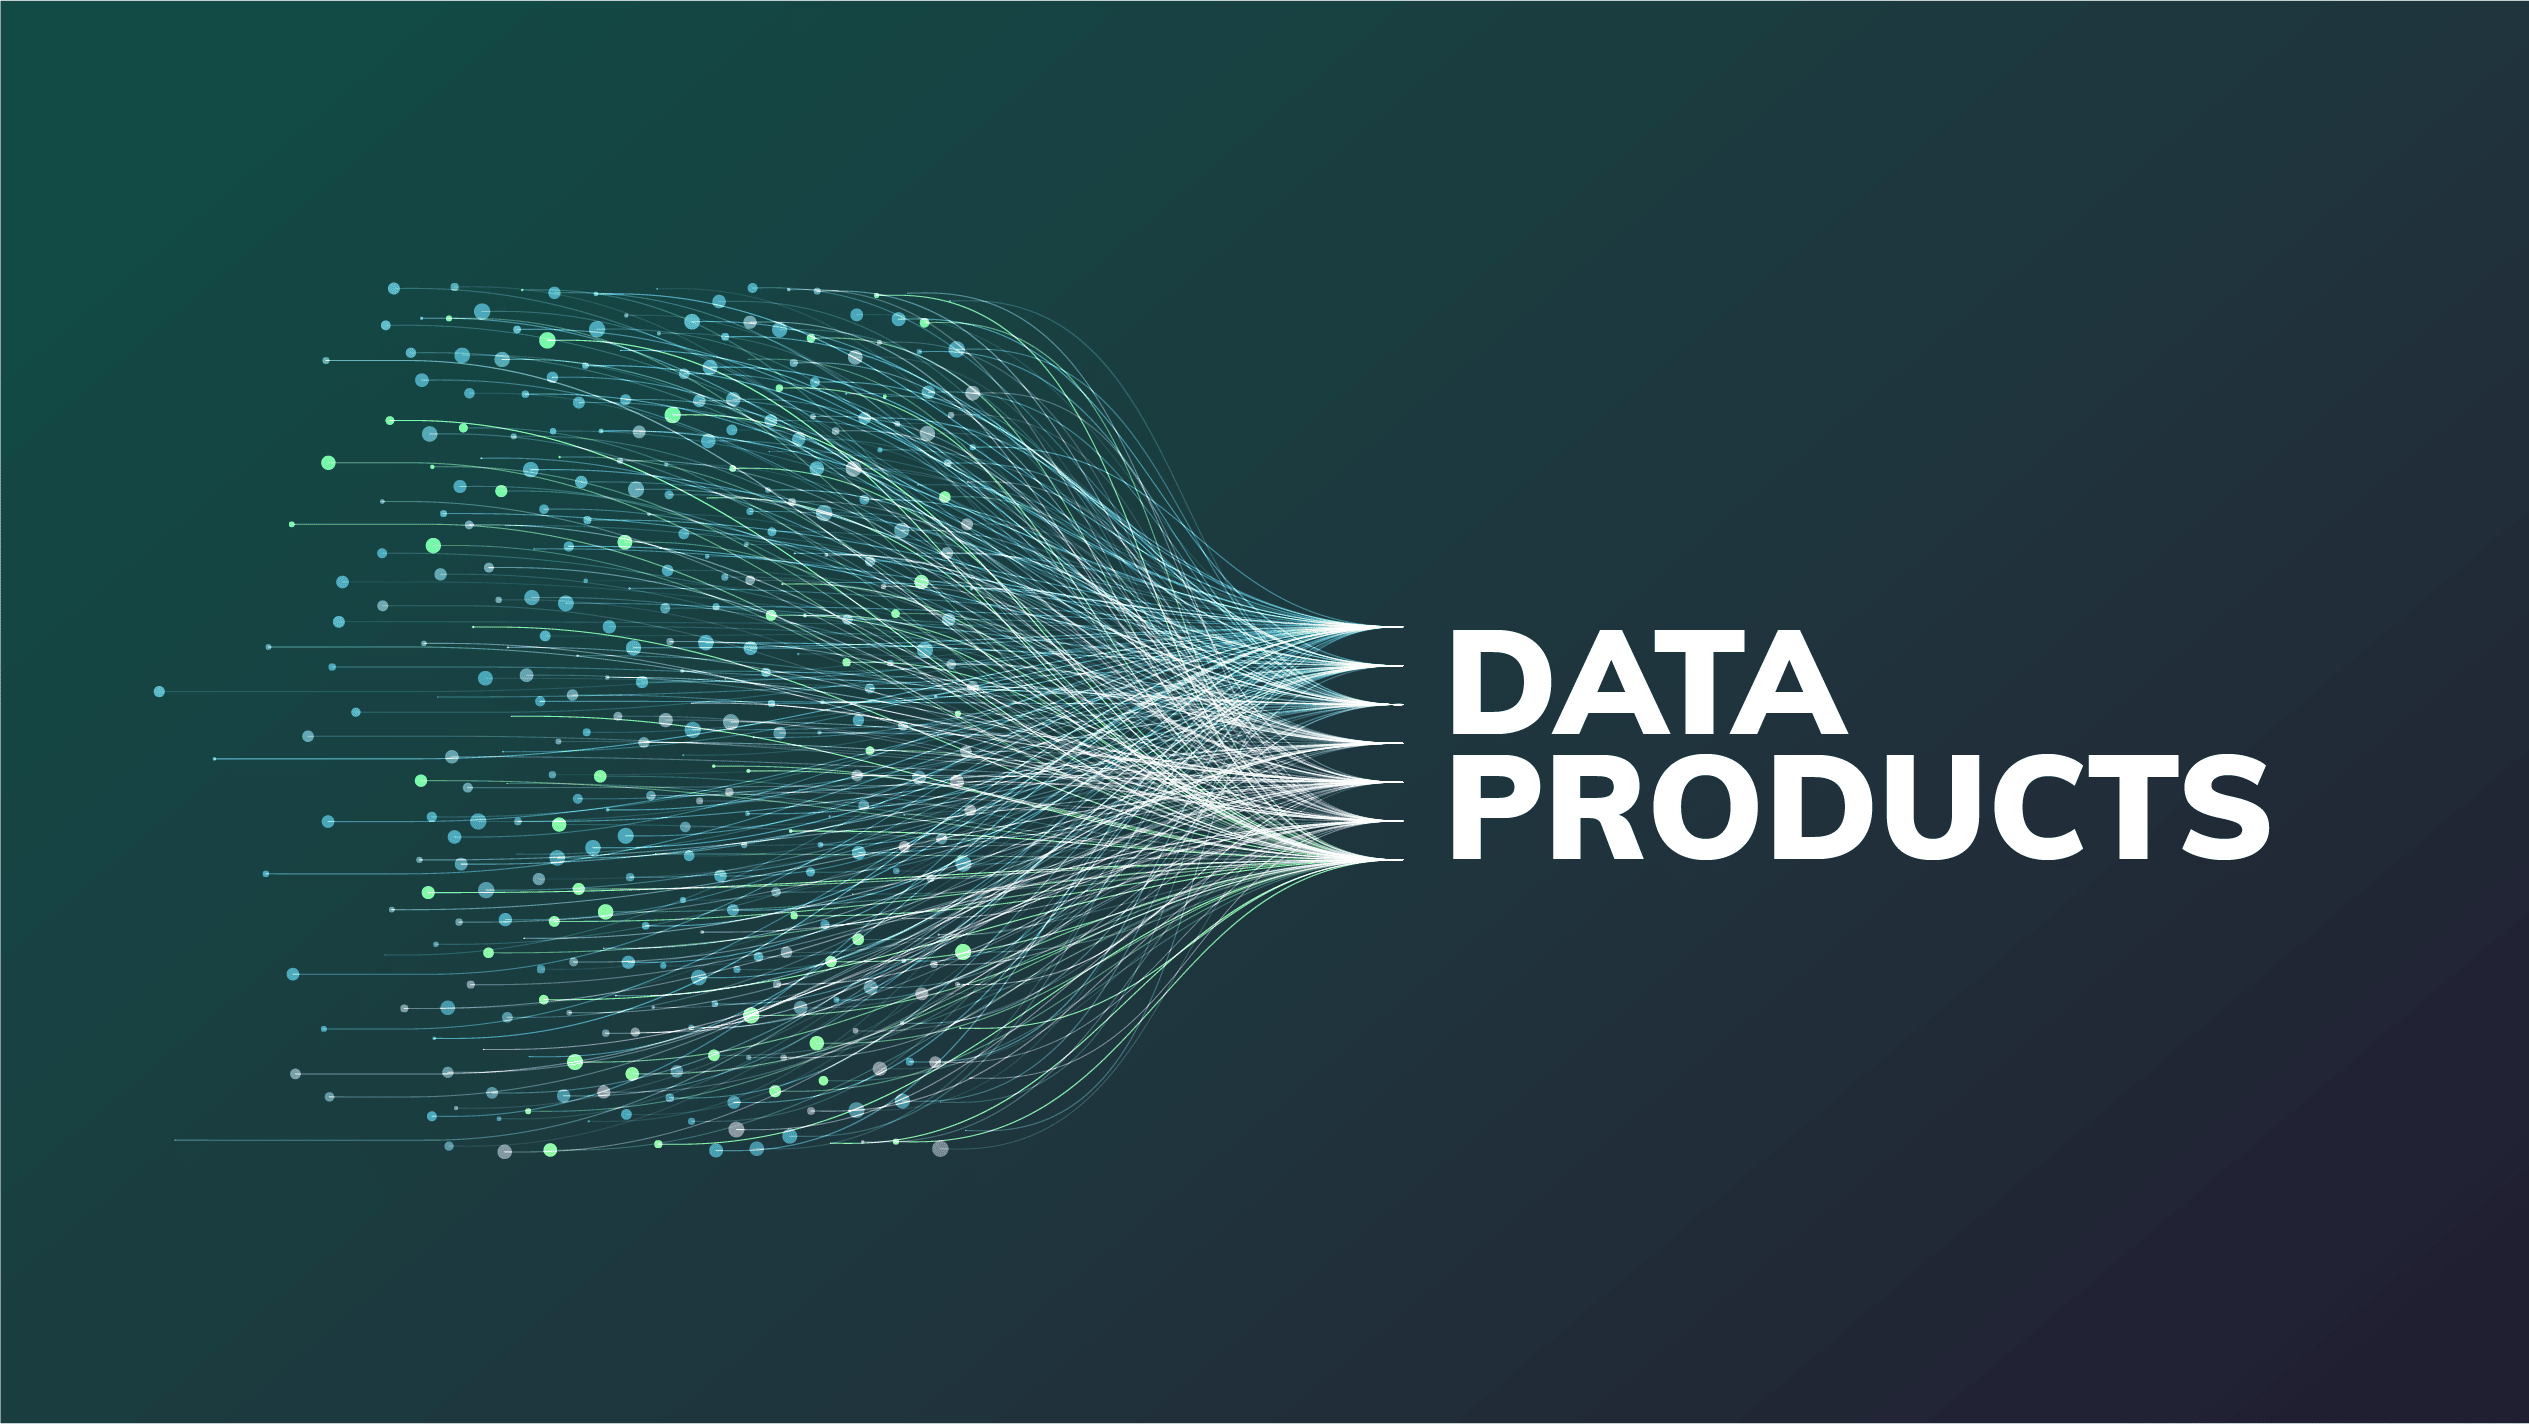 Introducing Data Products to Deliver Better Value from Data